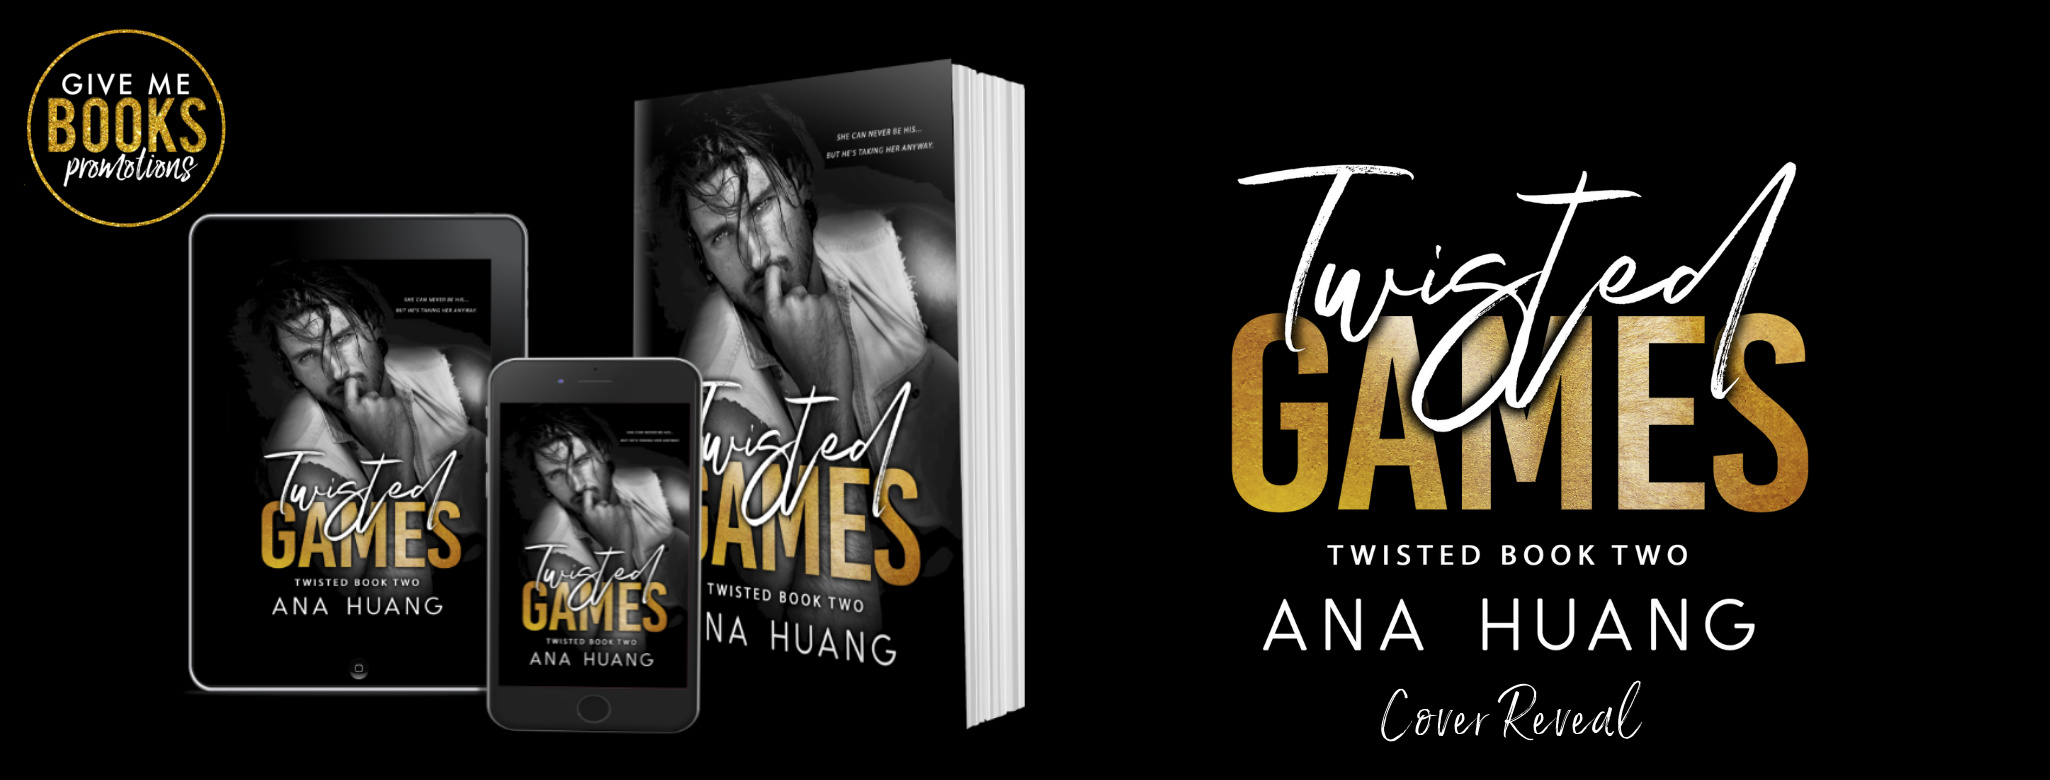 Give Me Books: Cover Reveal - Twisted Games by Ana Huang